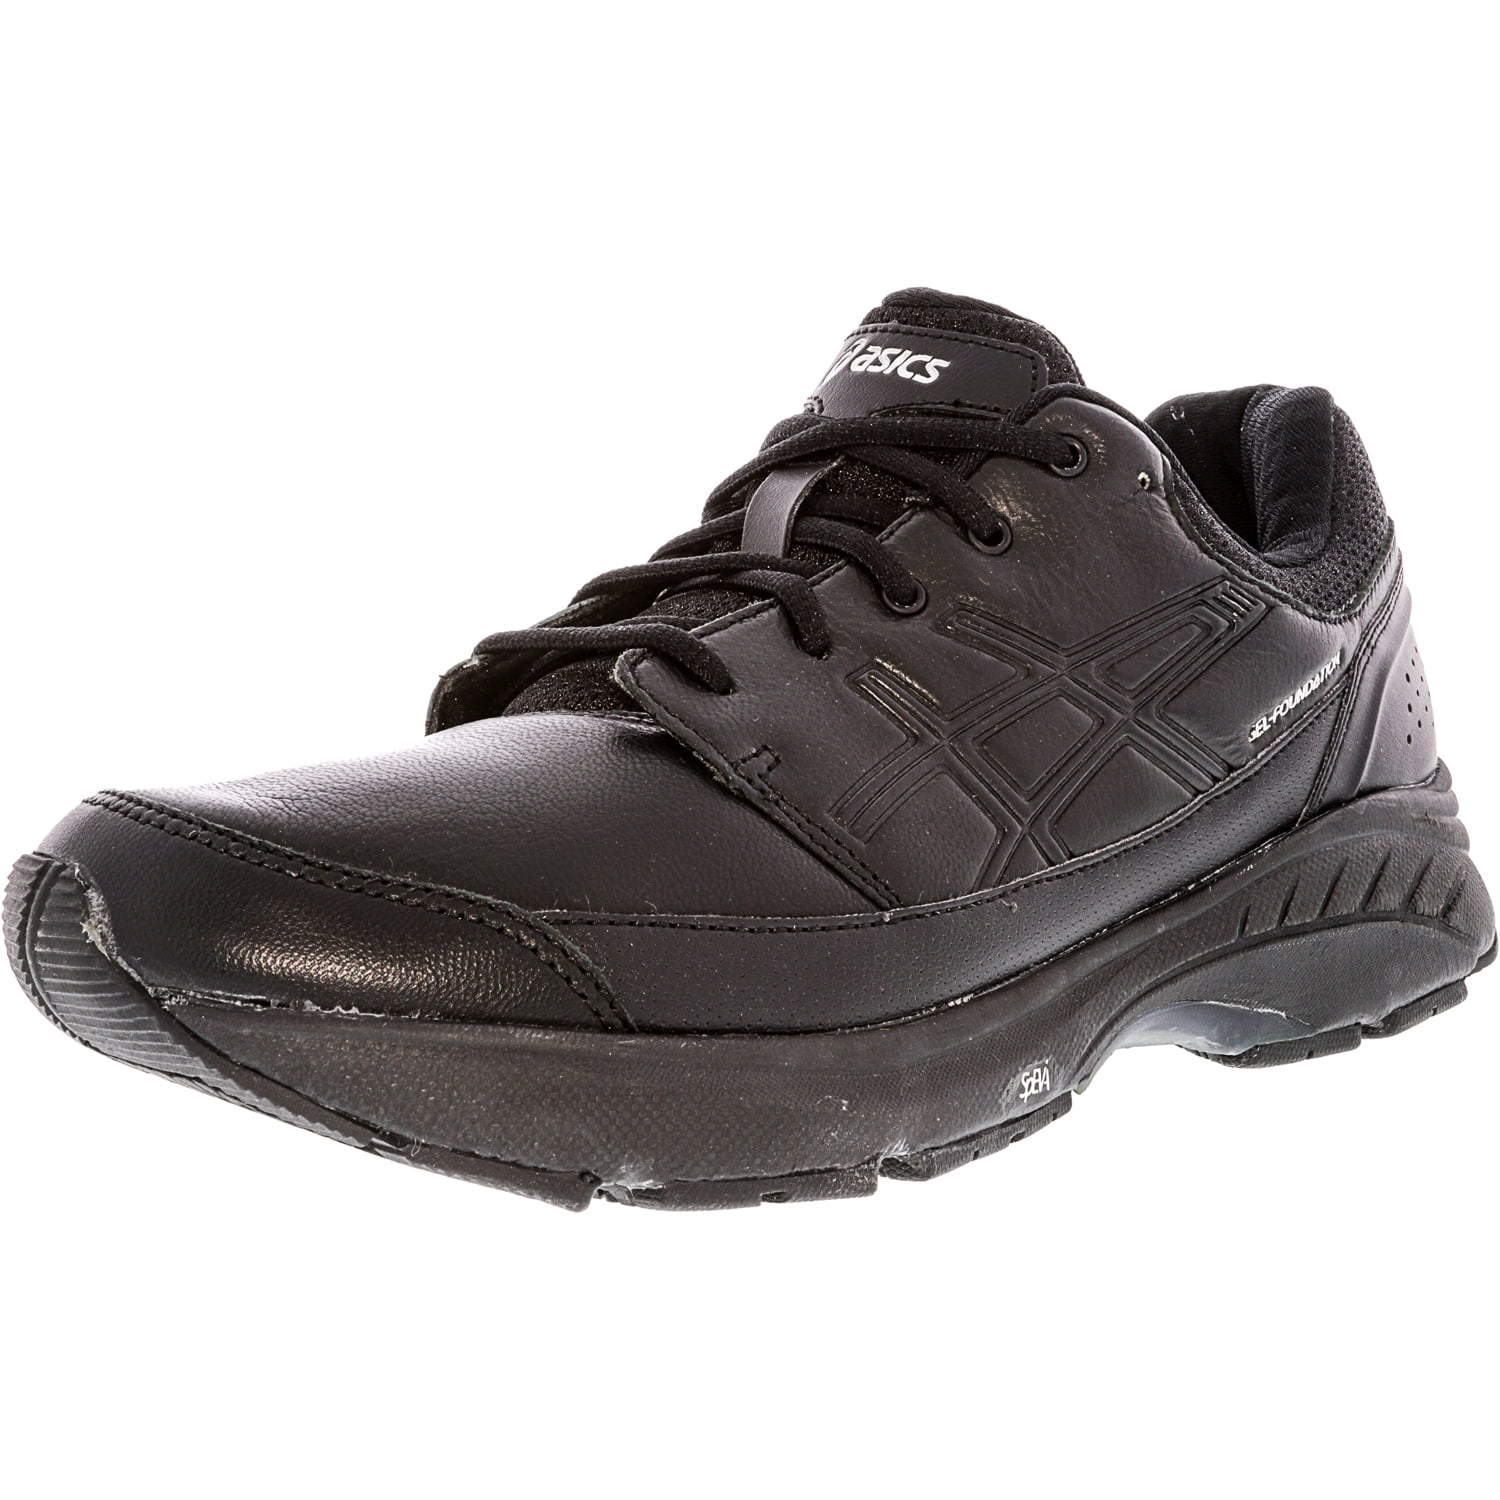 asics women's workplace shoes